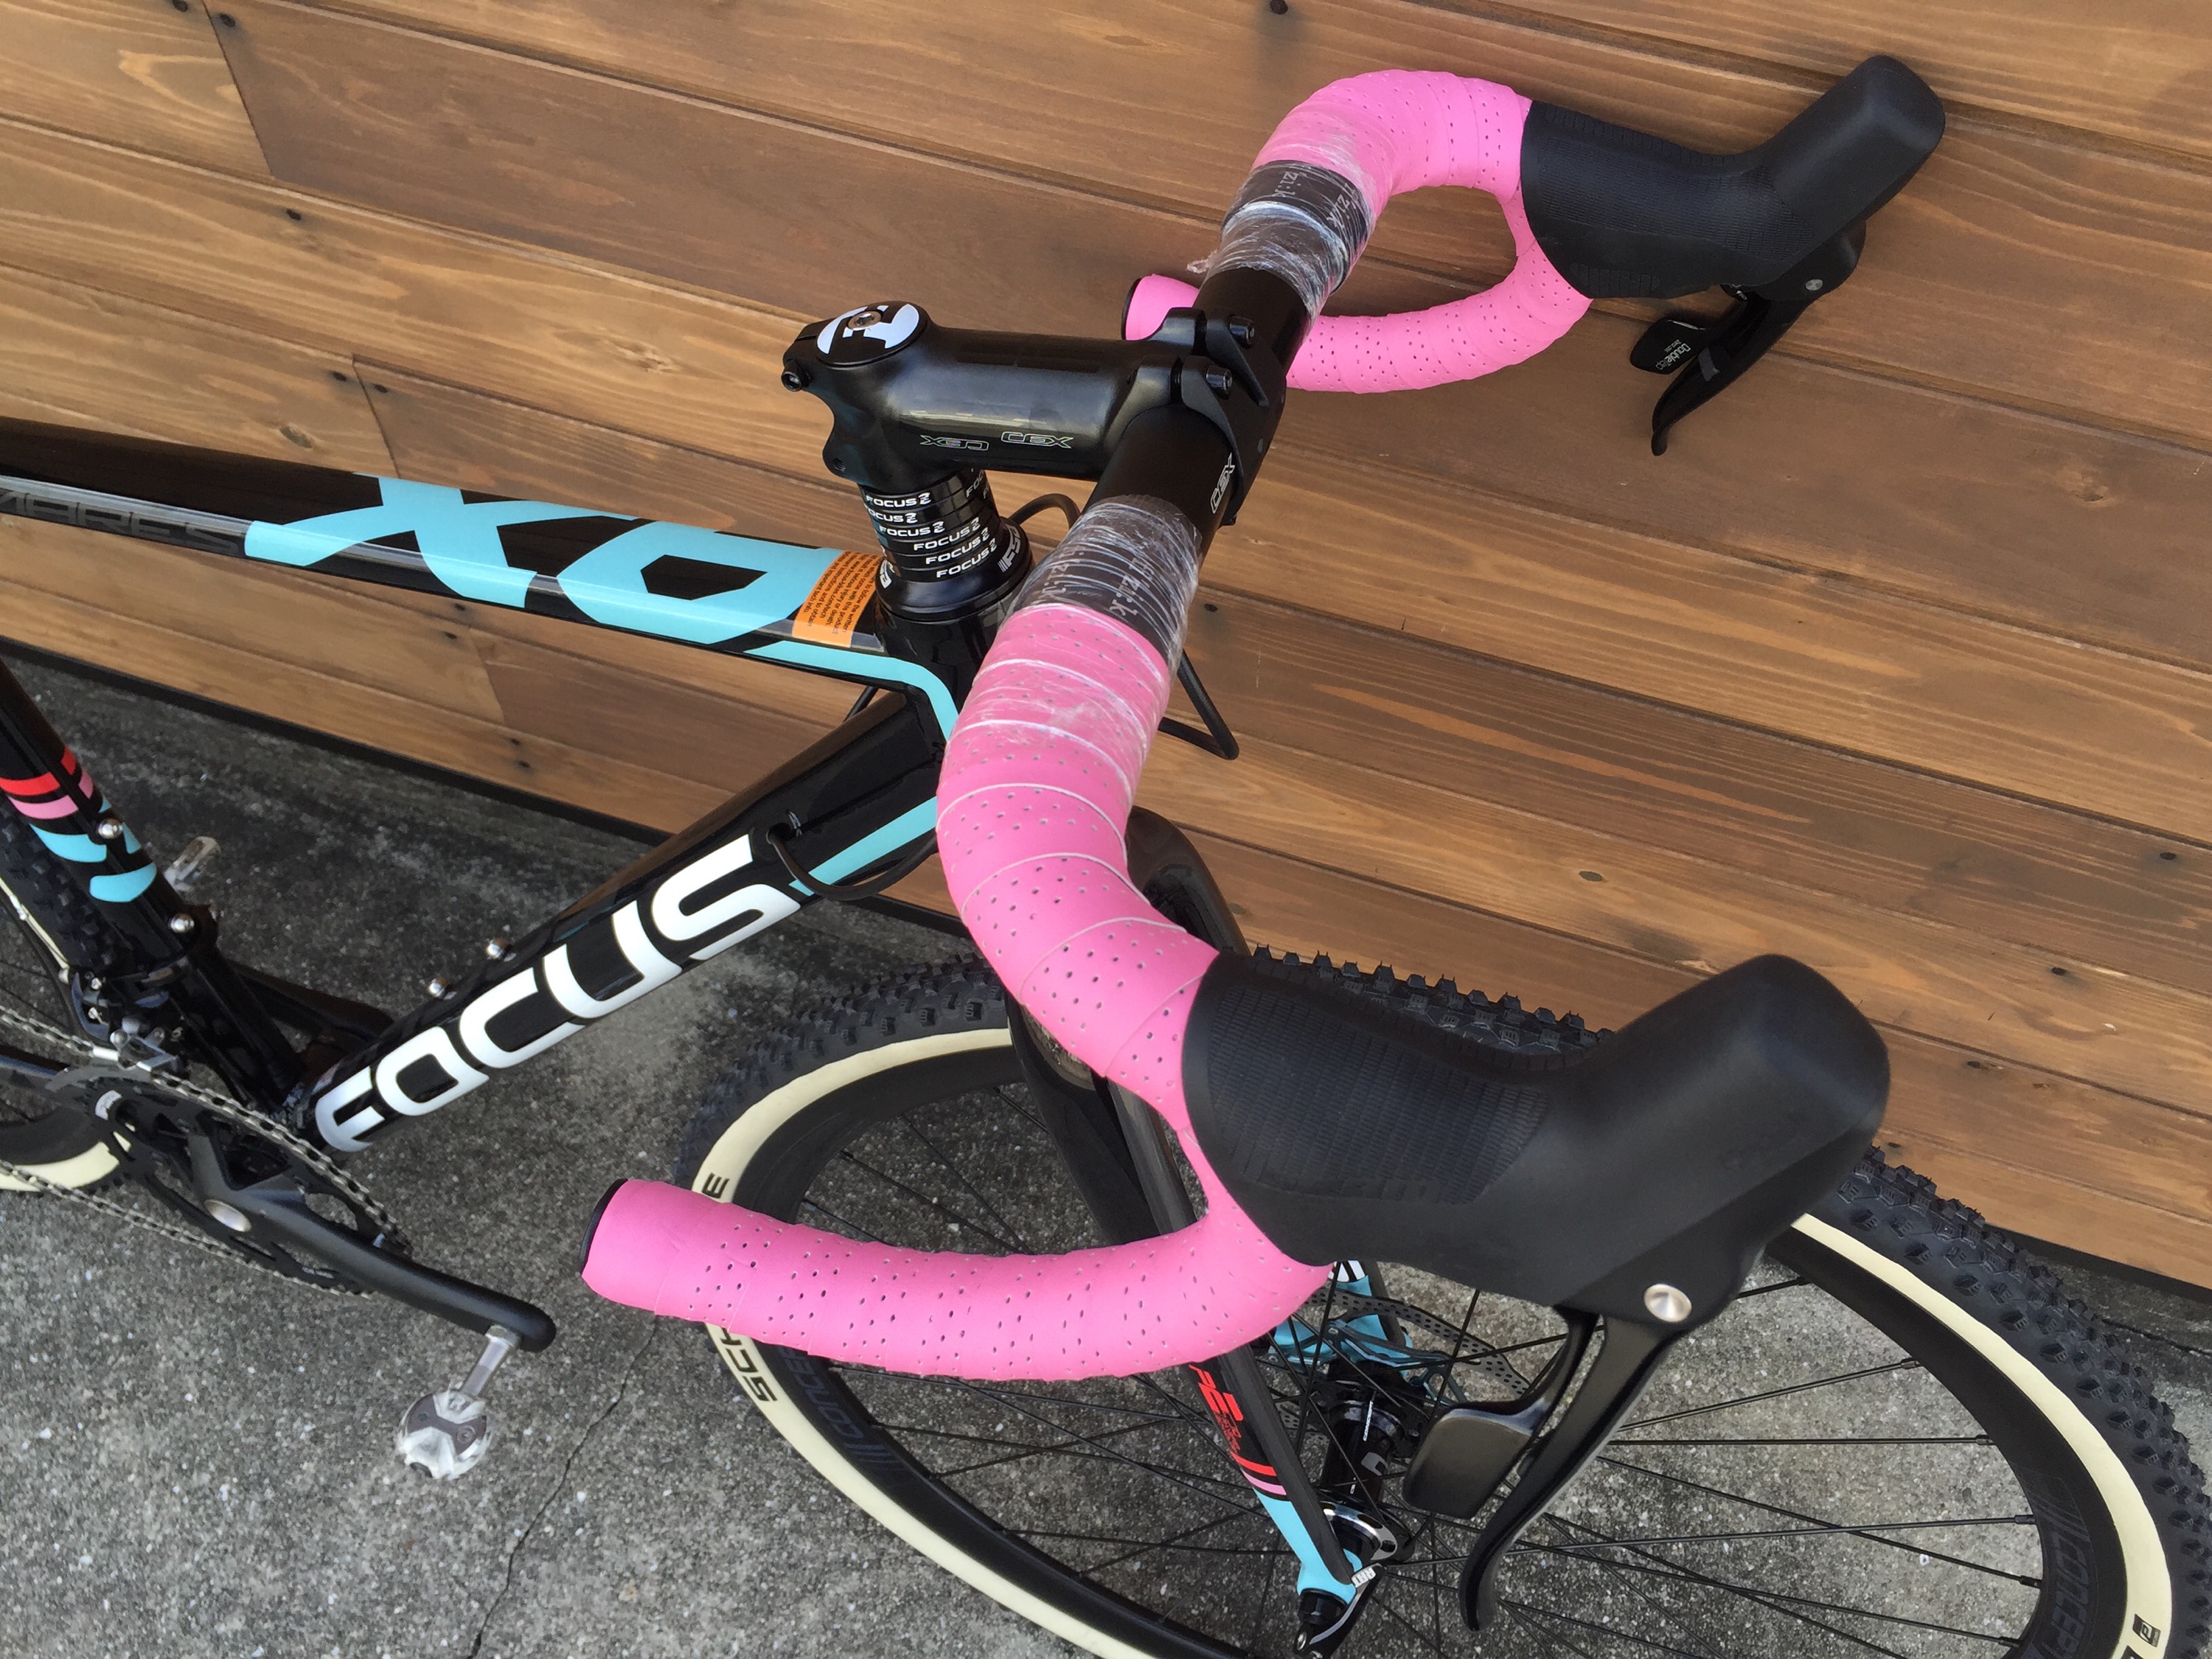 FOCUS MARES AX 1.0 DISC シクロバイク登場 !! | Climb cycle sports